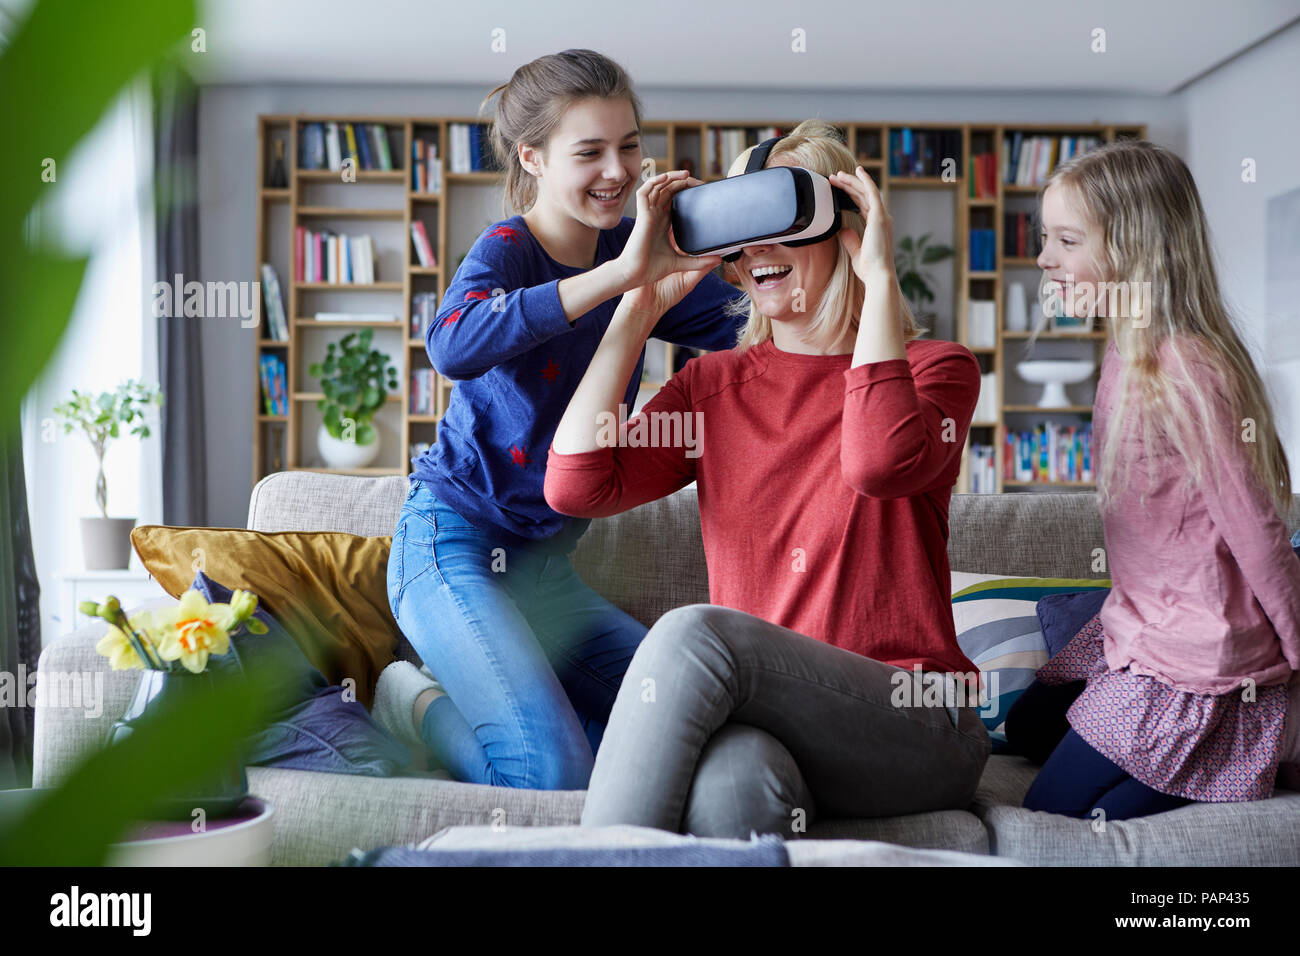 Daughters showing mother how to play with VR glasses Stock Photo